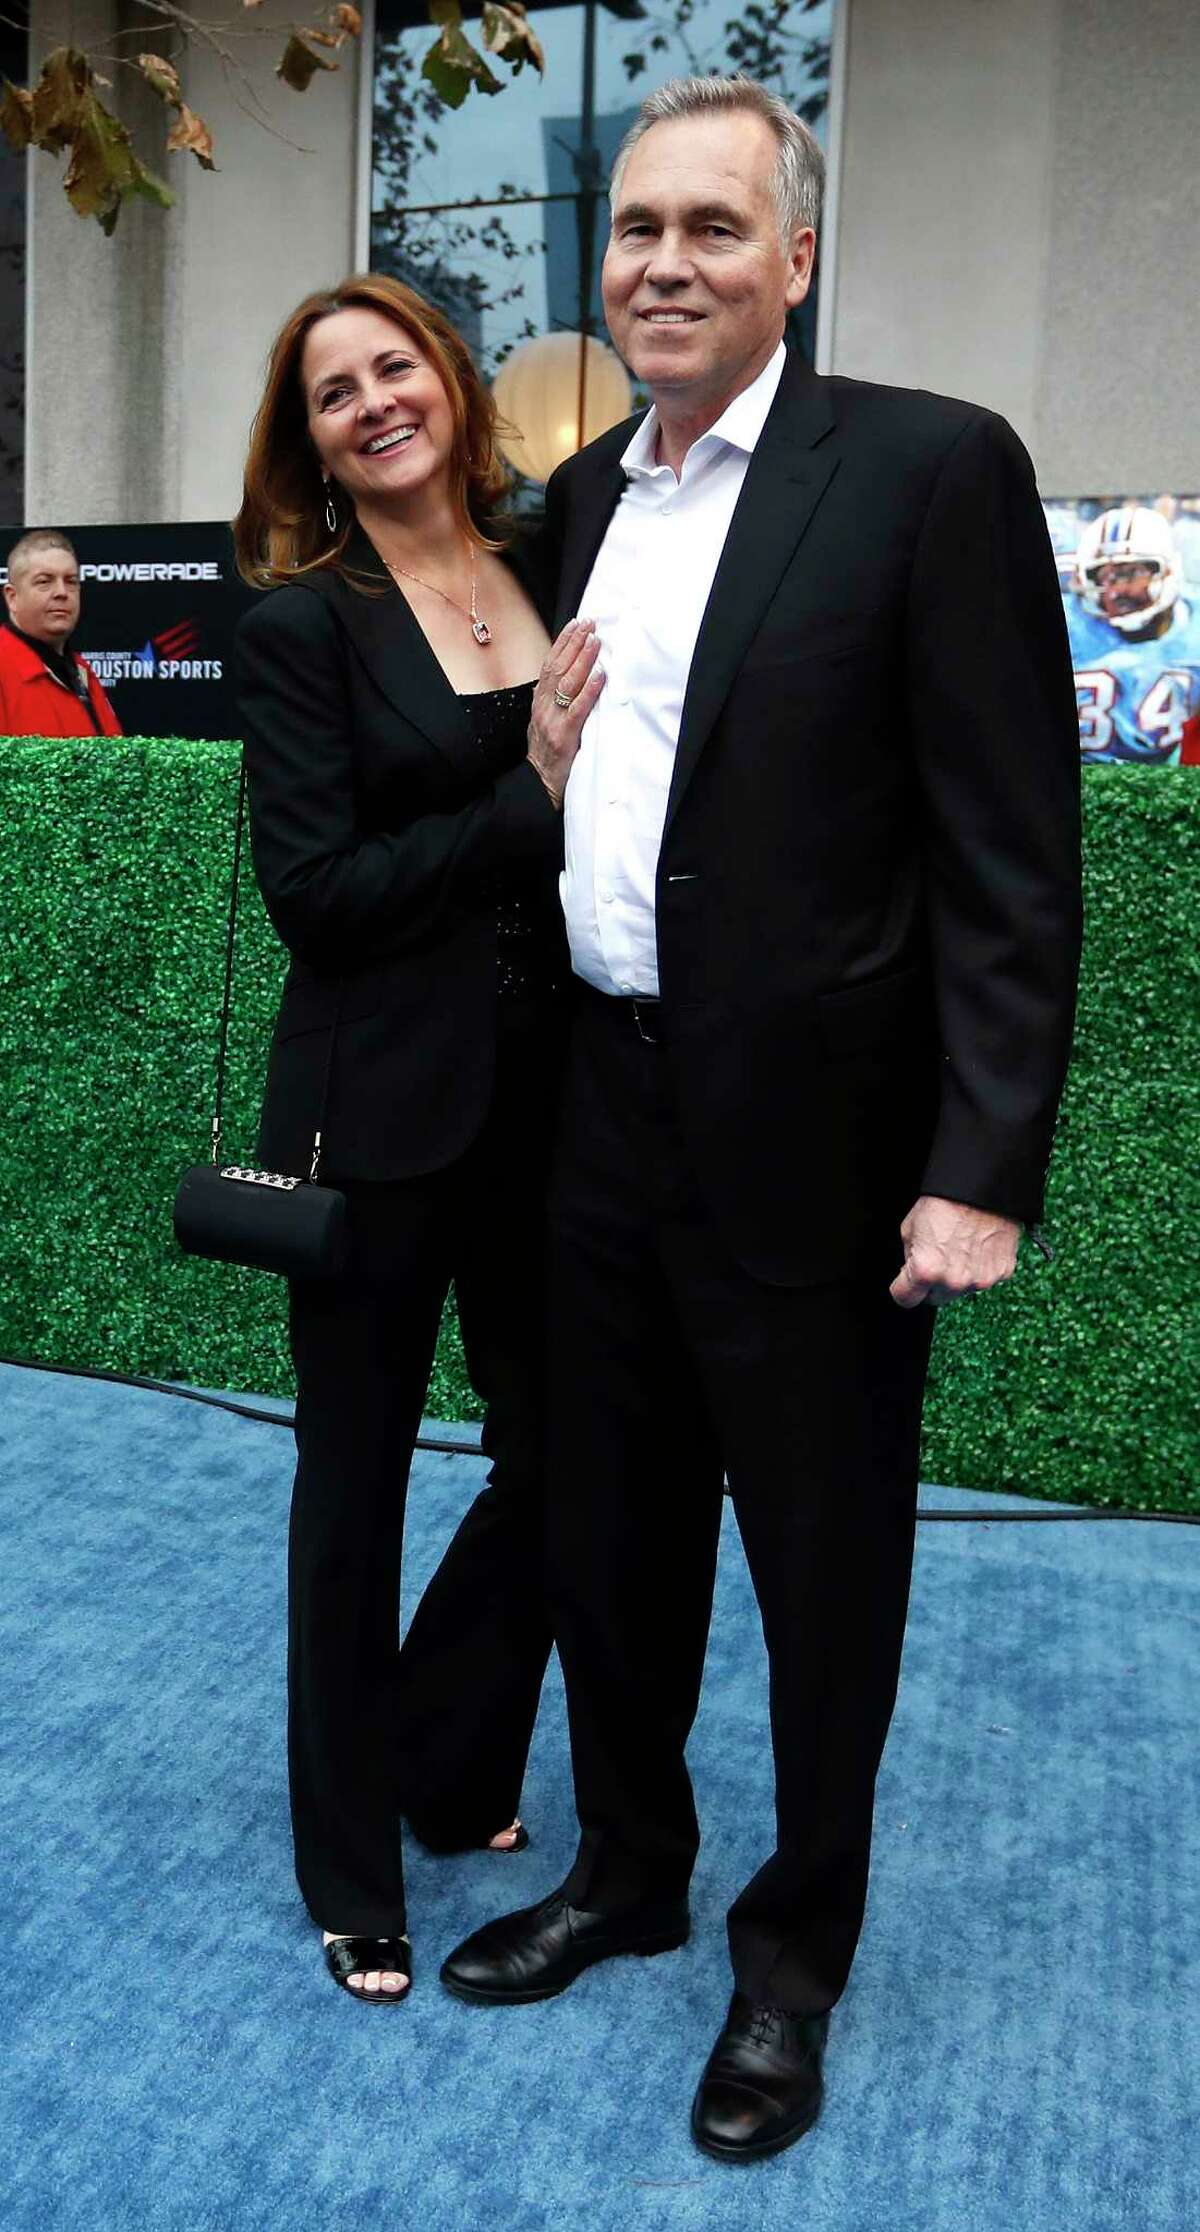 D'Antoni and his wife, Laurel, rock the blue carpet before the start of the Houston Sports Awards at the Hilton Americas earlier this month. They met while he was playing basketball in Italy and she was a fashion model.